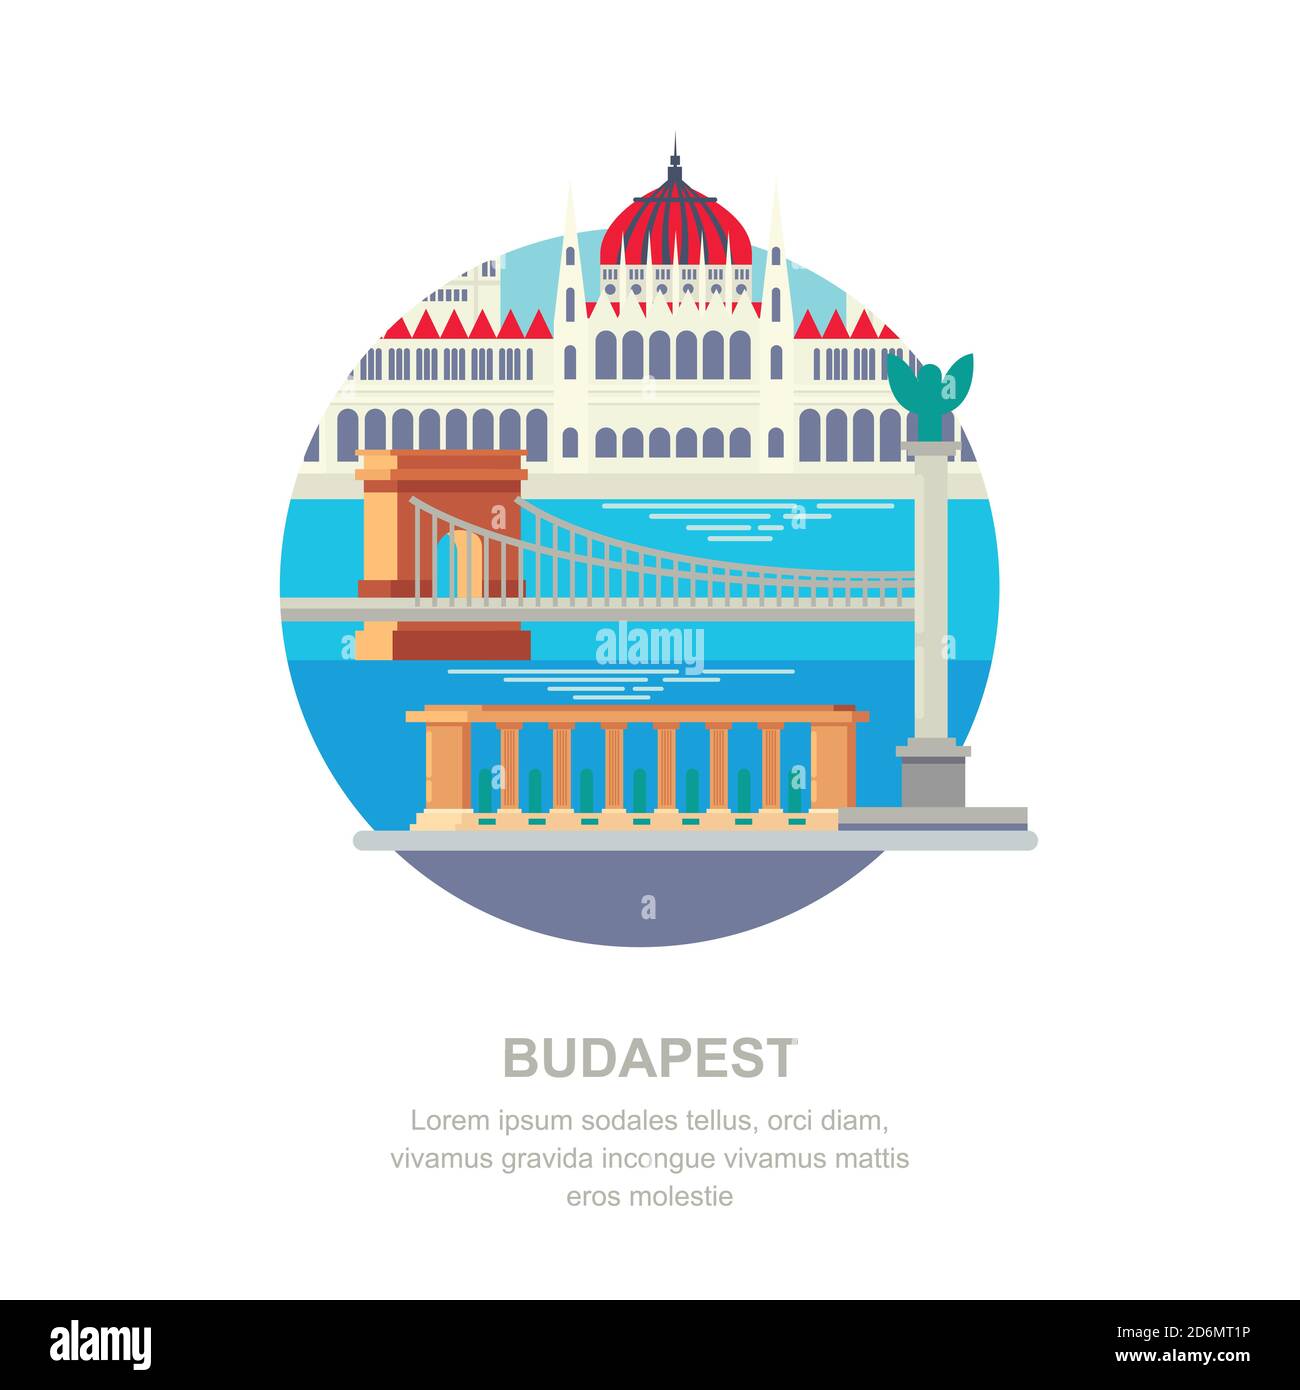 Travel to Hungary vector flat illustration. Budapest city symbols and touristic landmarks. City building icons and design elements. Stock Vector